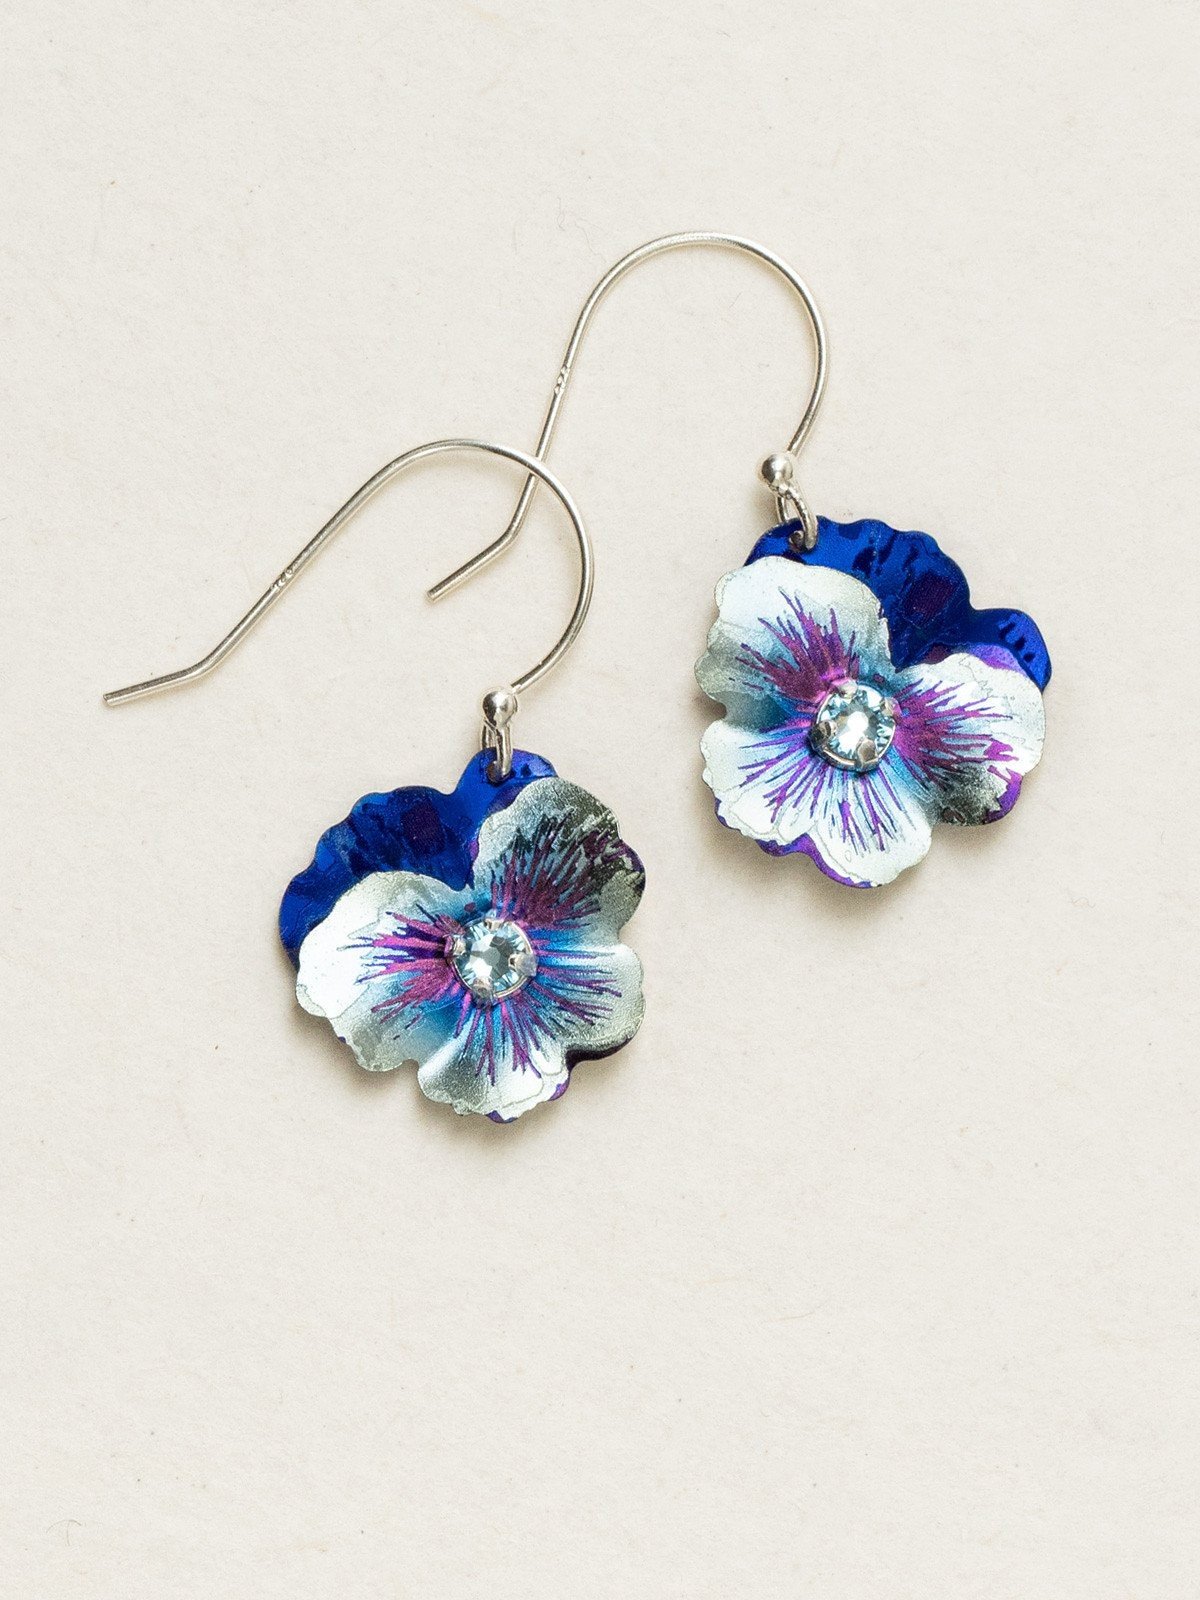 Blue pansy earrings by jewelry designer Holly Yashi